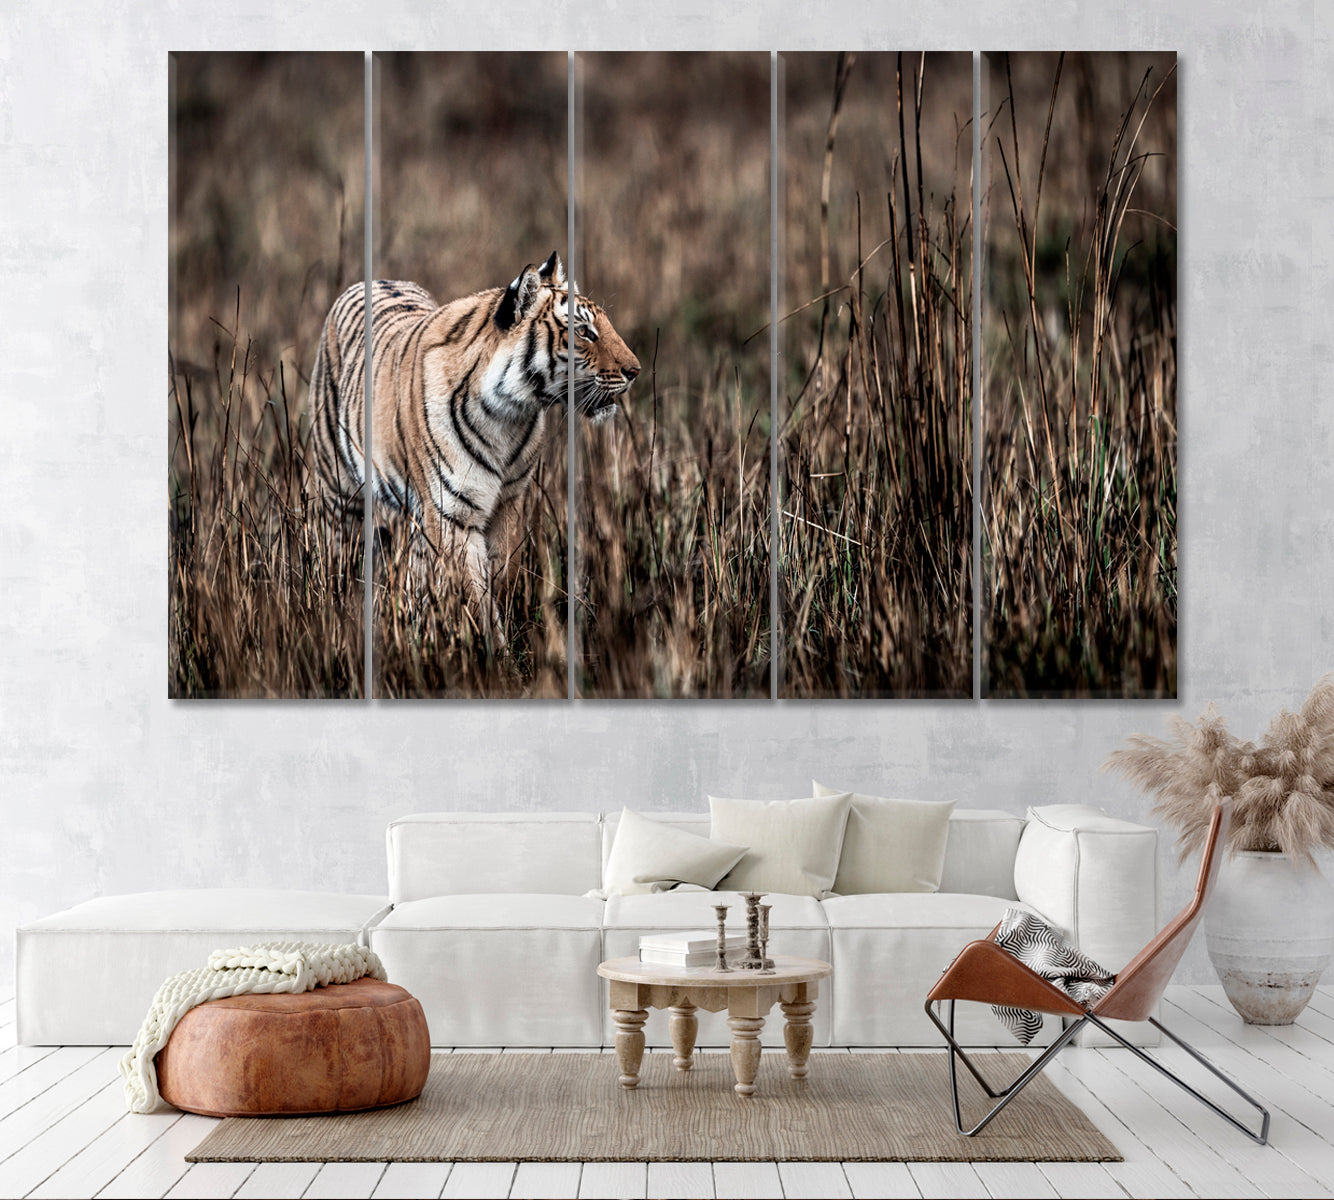 Tiger in Jim Corbett National Park India Canvas Print ArtLexy 5 Panels 36"x24" inches 